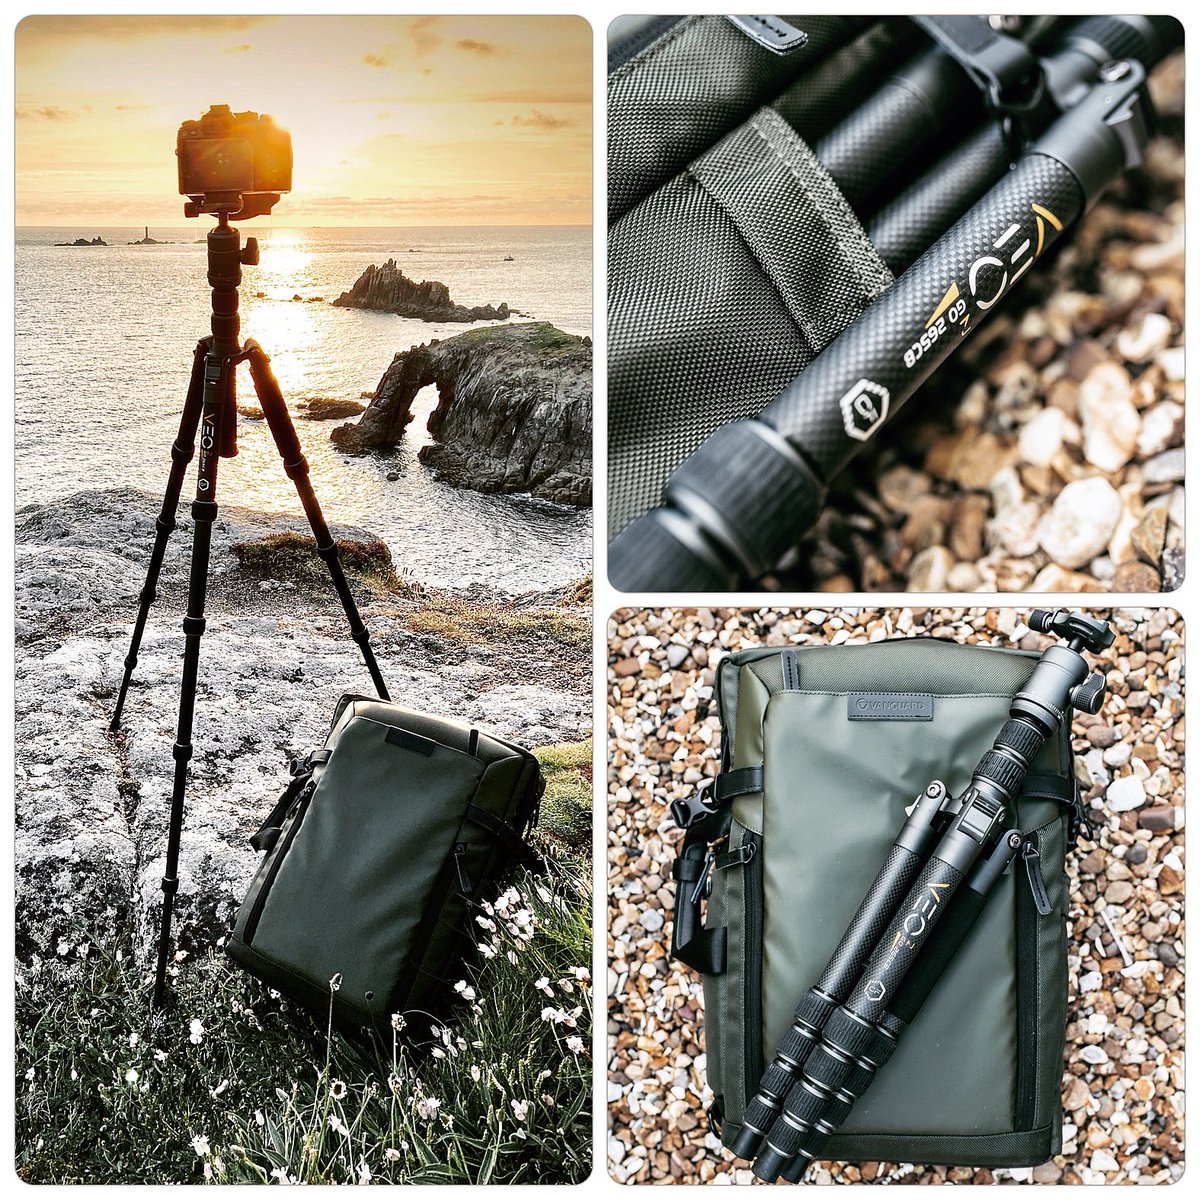 Me and my Vanguard’s great products by a great company #vanguard #vanguardtripod #cornwall #photographer #travelphotography #tripod #camerabag